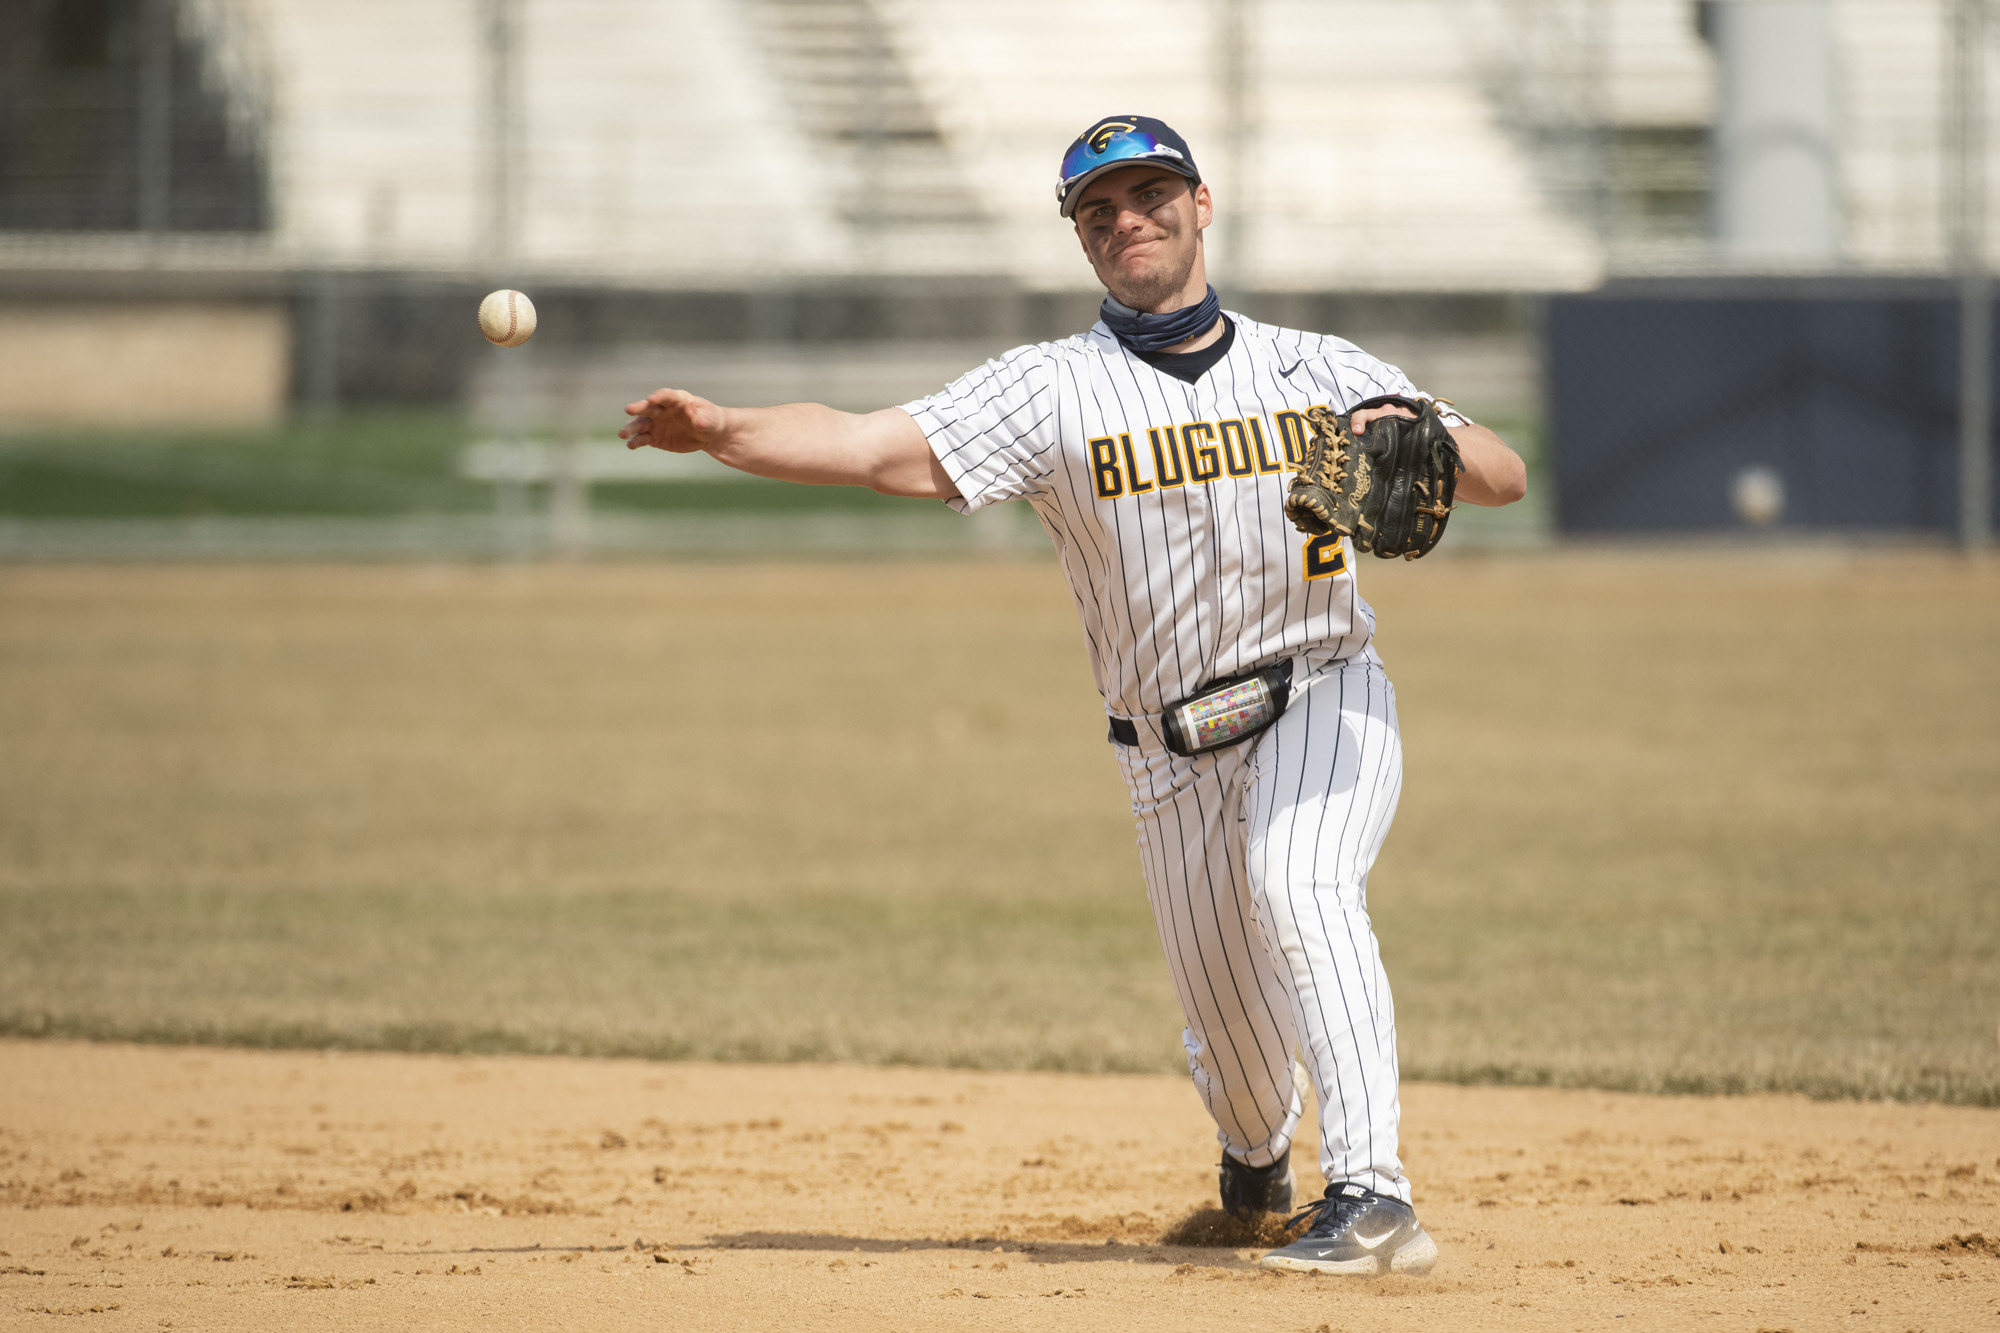 Blugolds drop doubleheader to Titans